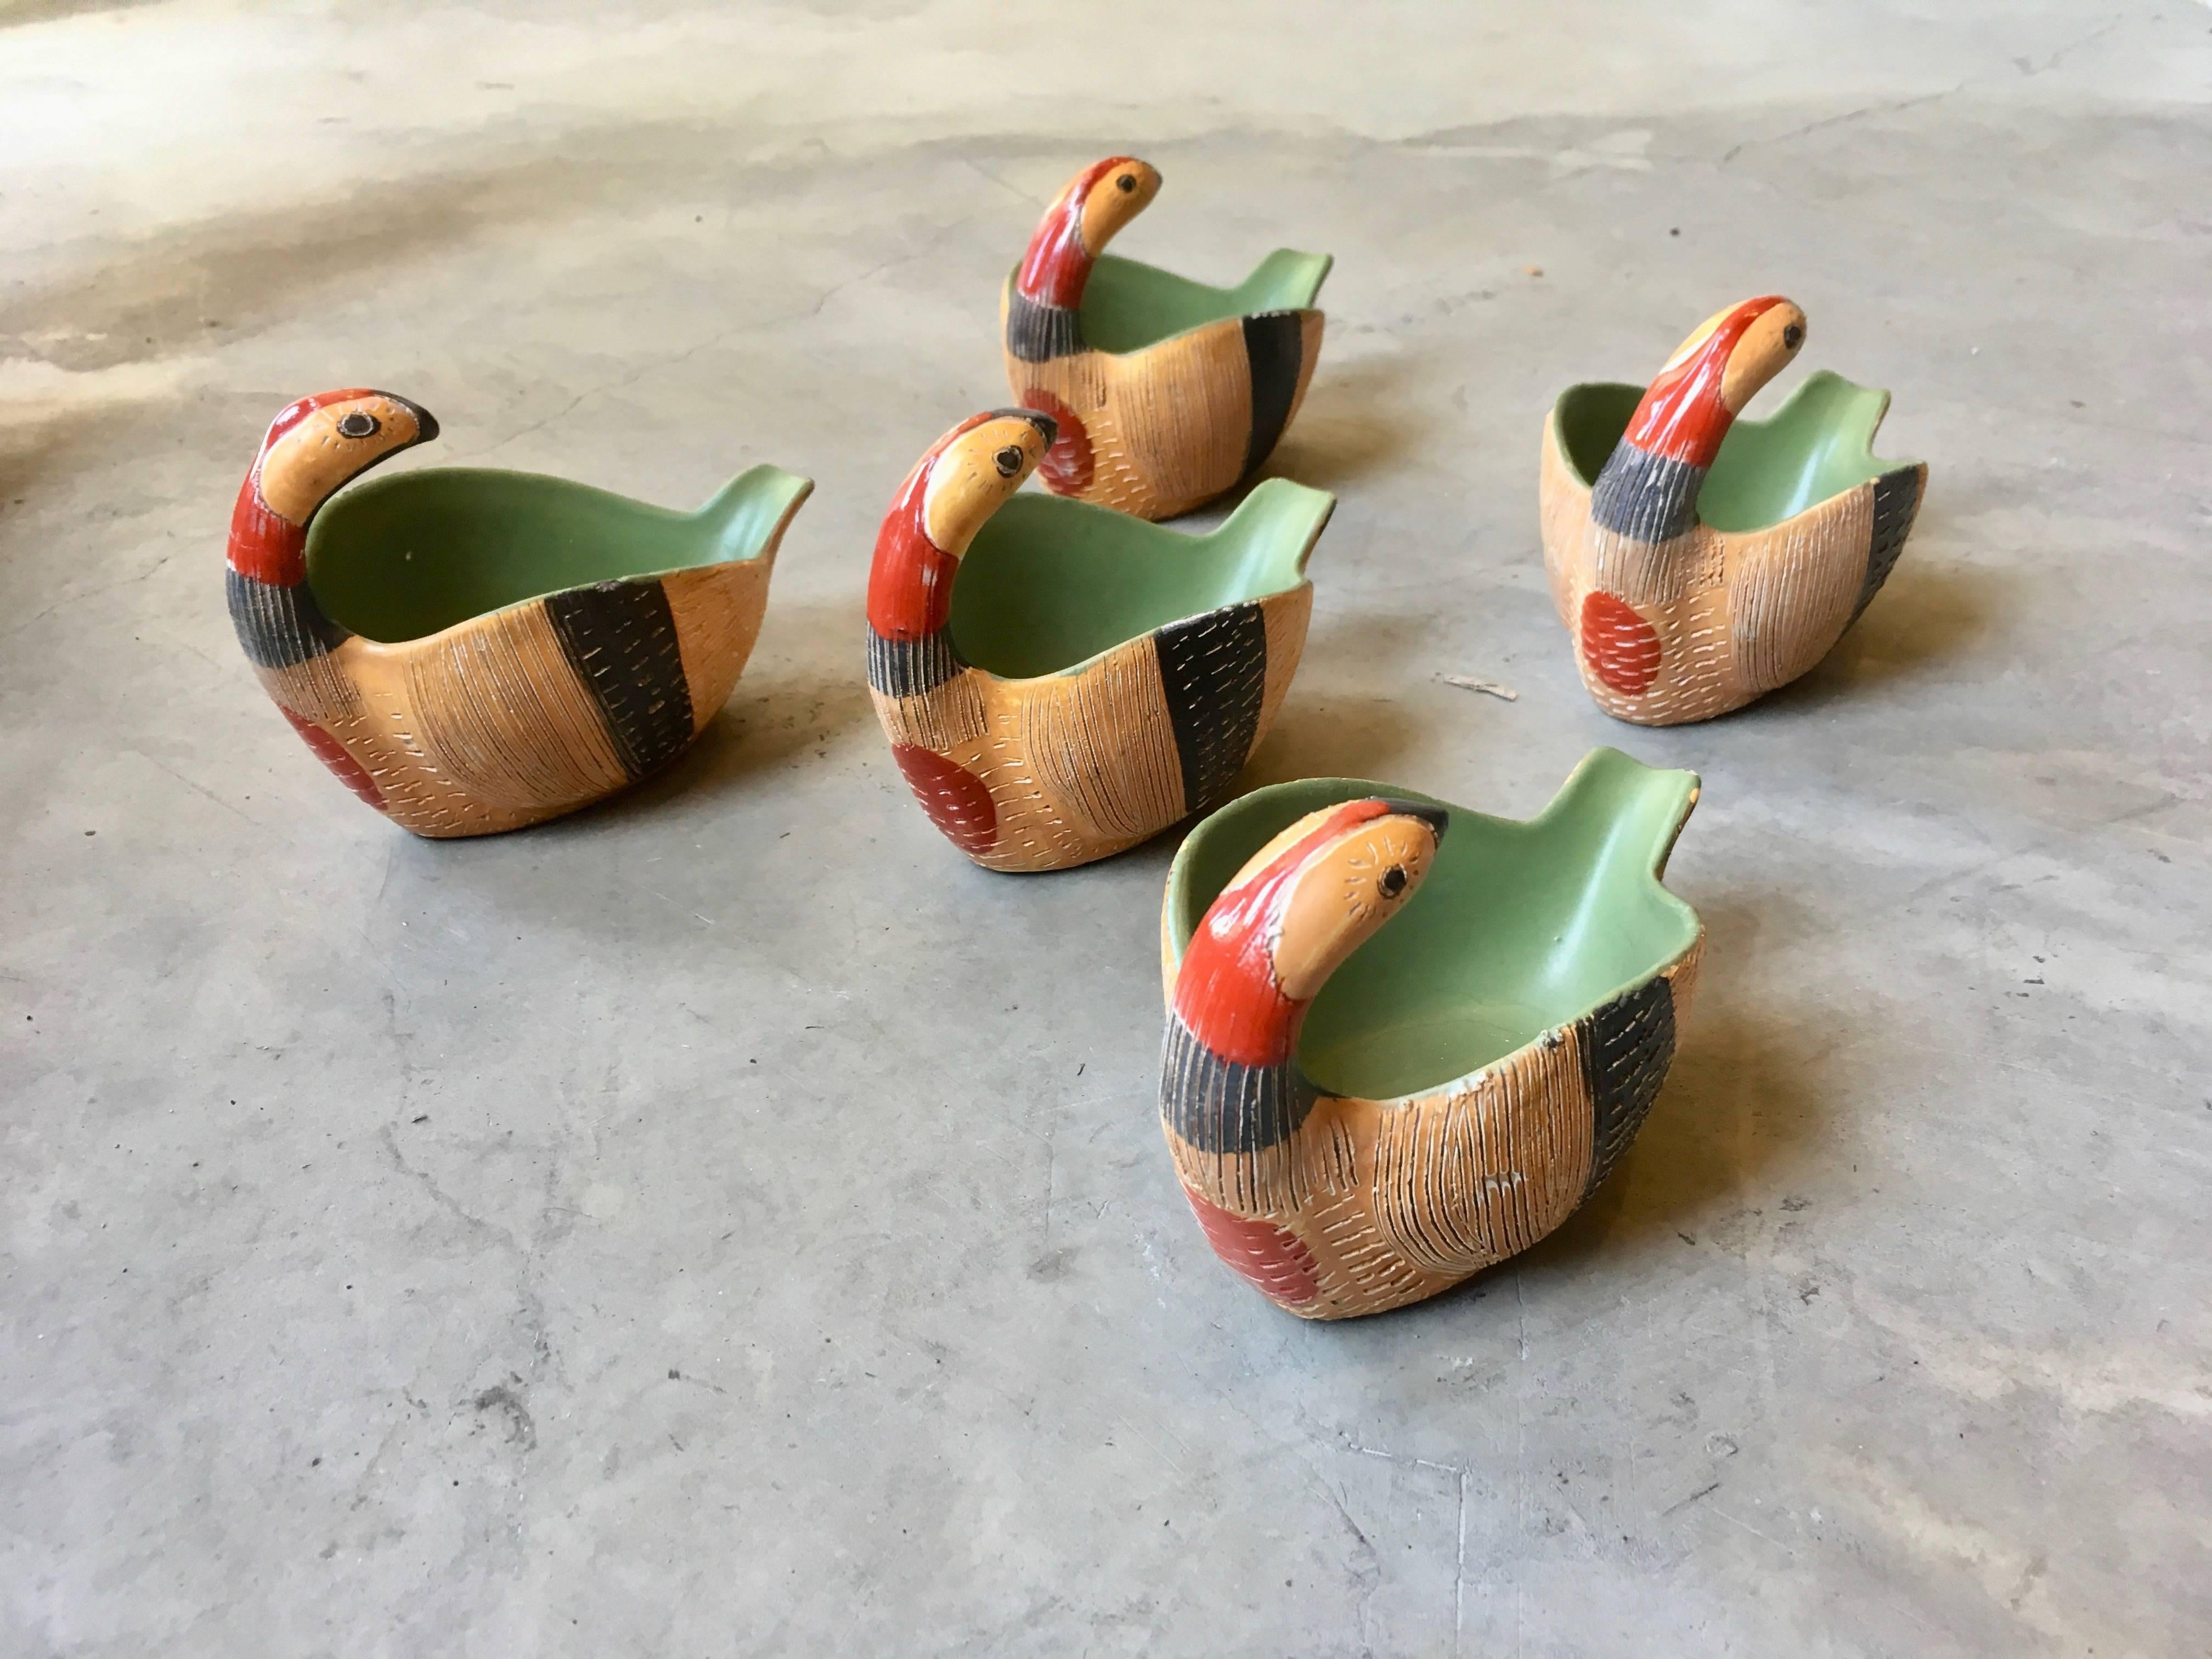 Interesting ceramic bowls in the shape of a bird. Great paint and coloring. Could be used as a bowl or small serving dish. Good vintage condition. Hand-sculpted and hand-painted. Marked Italy 95/607 on bottom of each bowl. Sold as a set of 5.